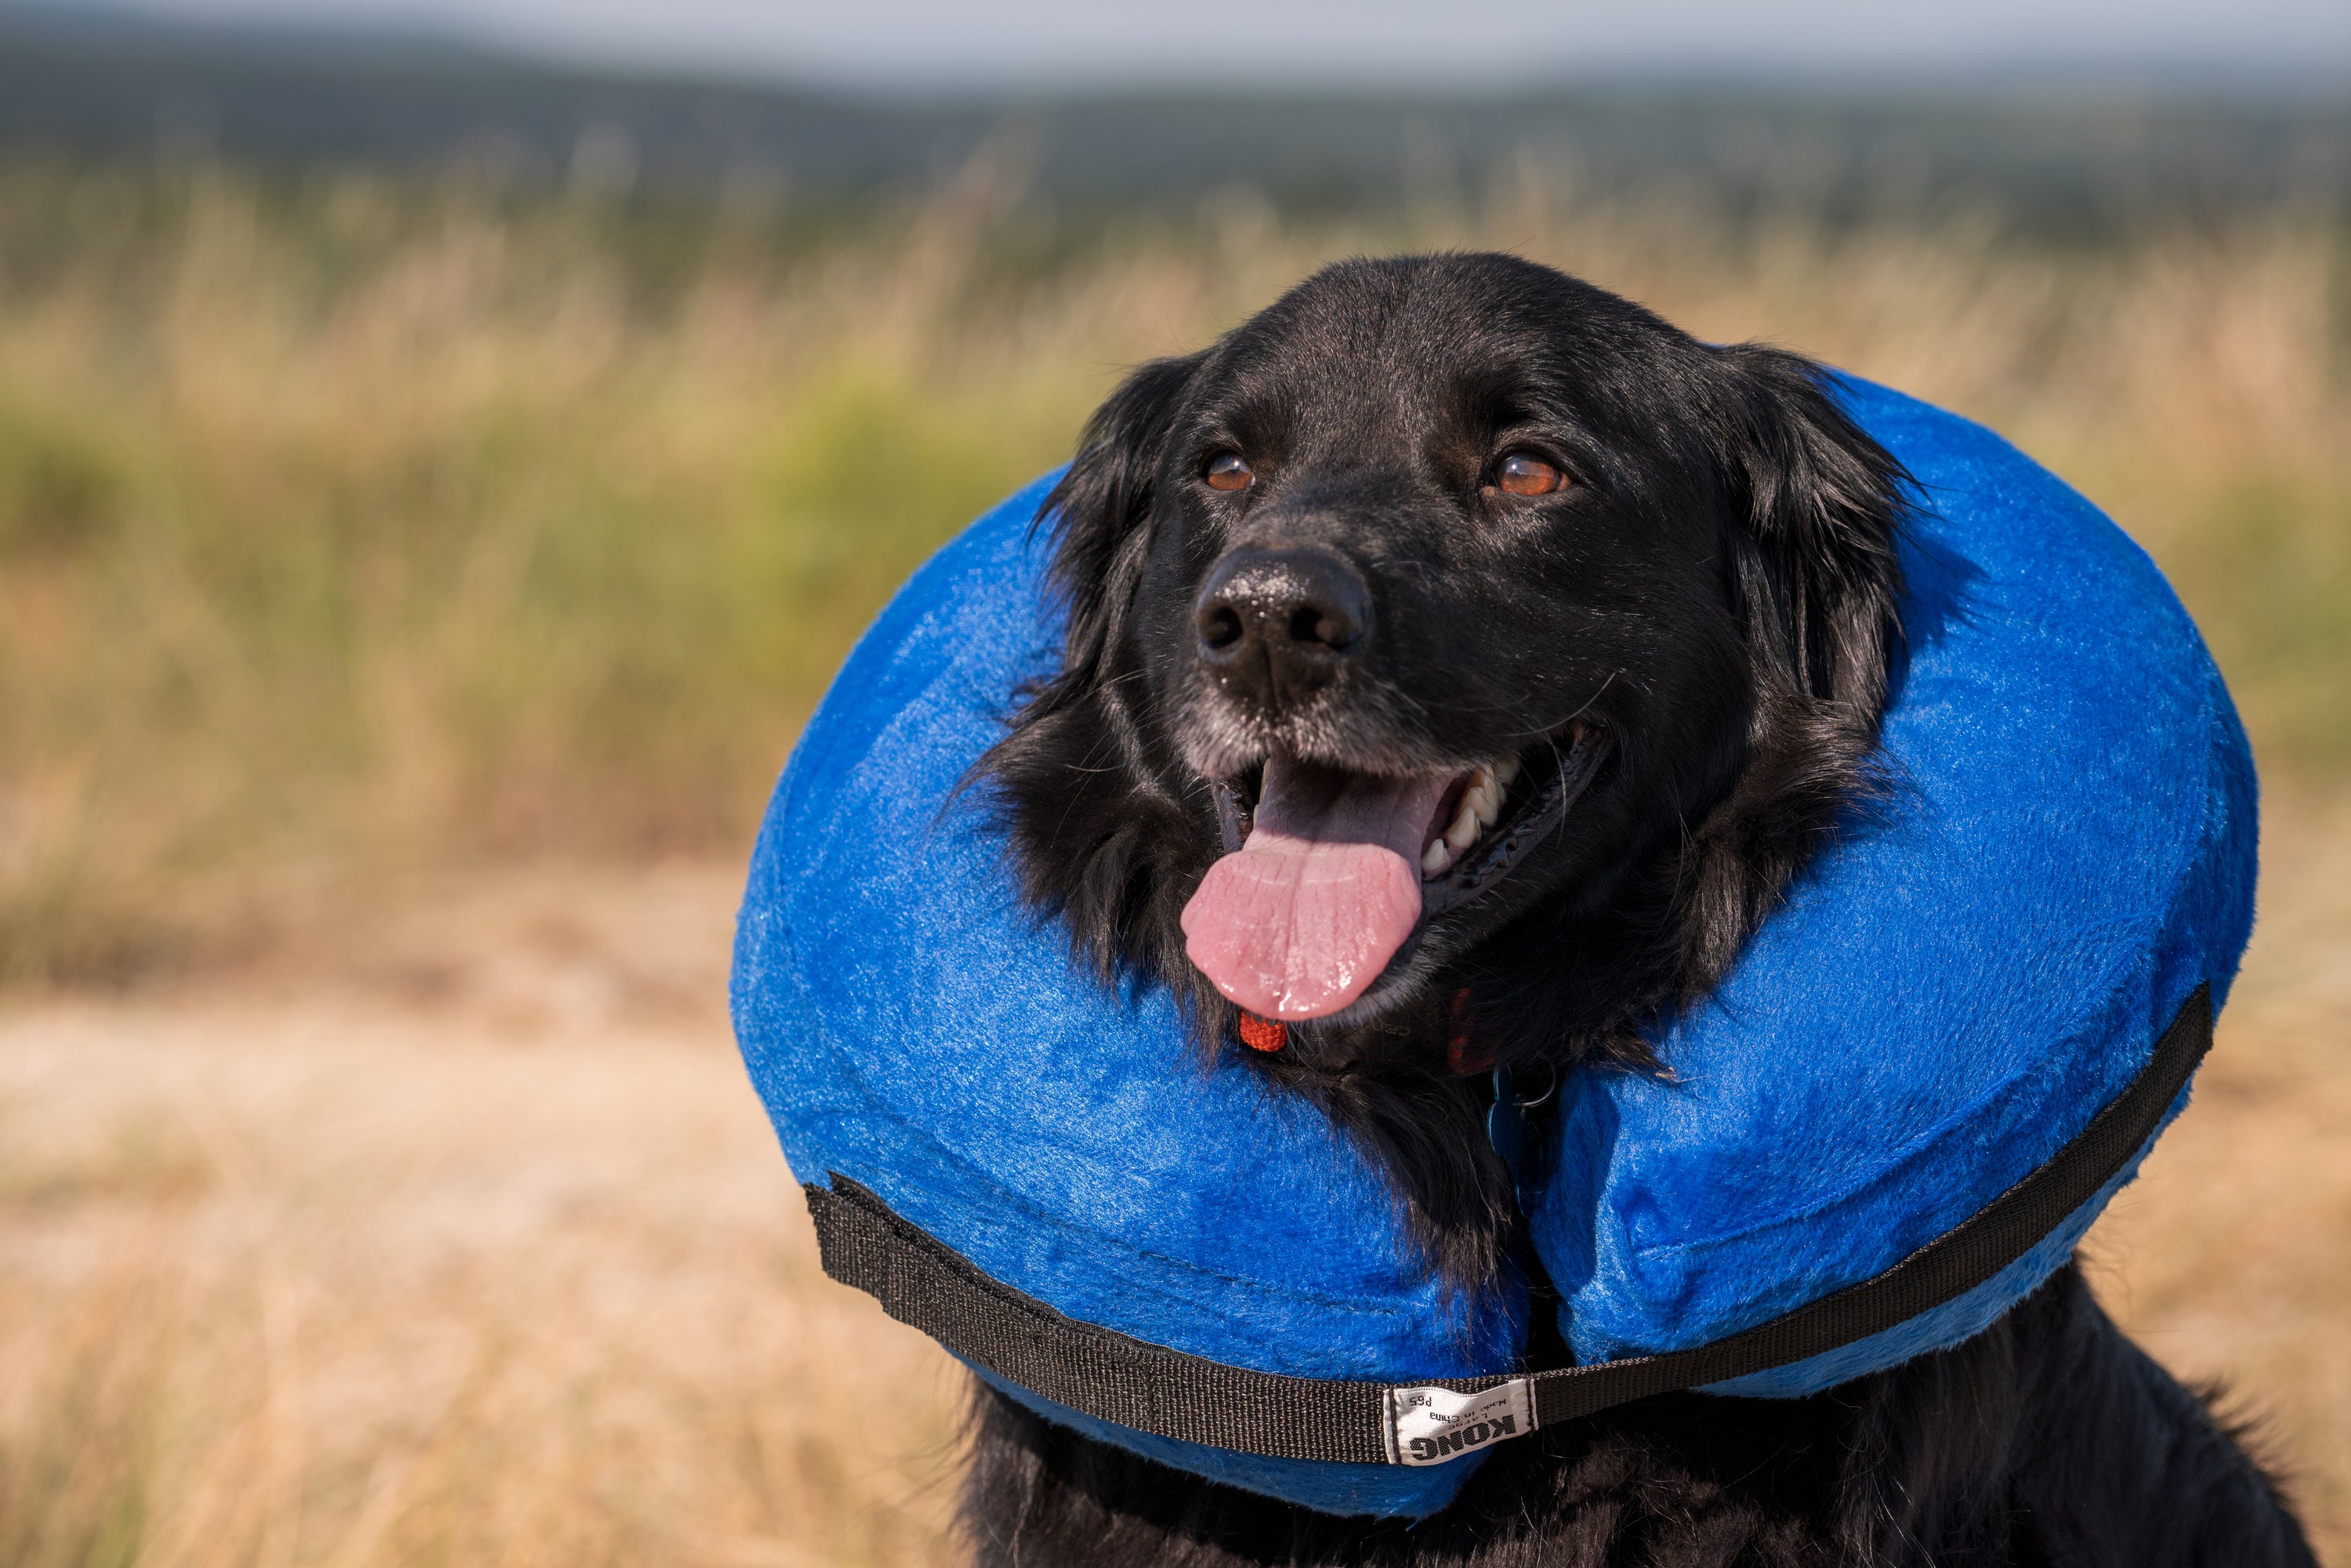  Health Supplies - Dogs: Pet Supplies: Recovery Collars & Cones,  Supplements & Vitamins, Dental Care & More